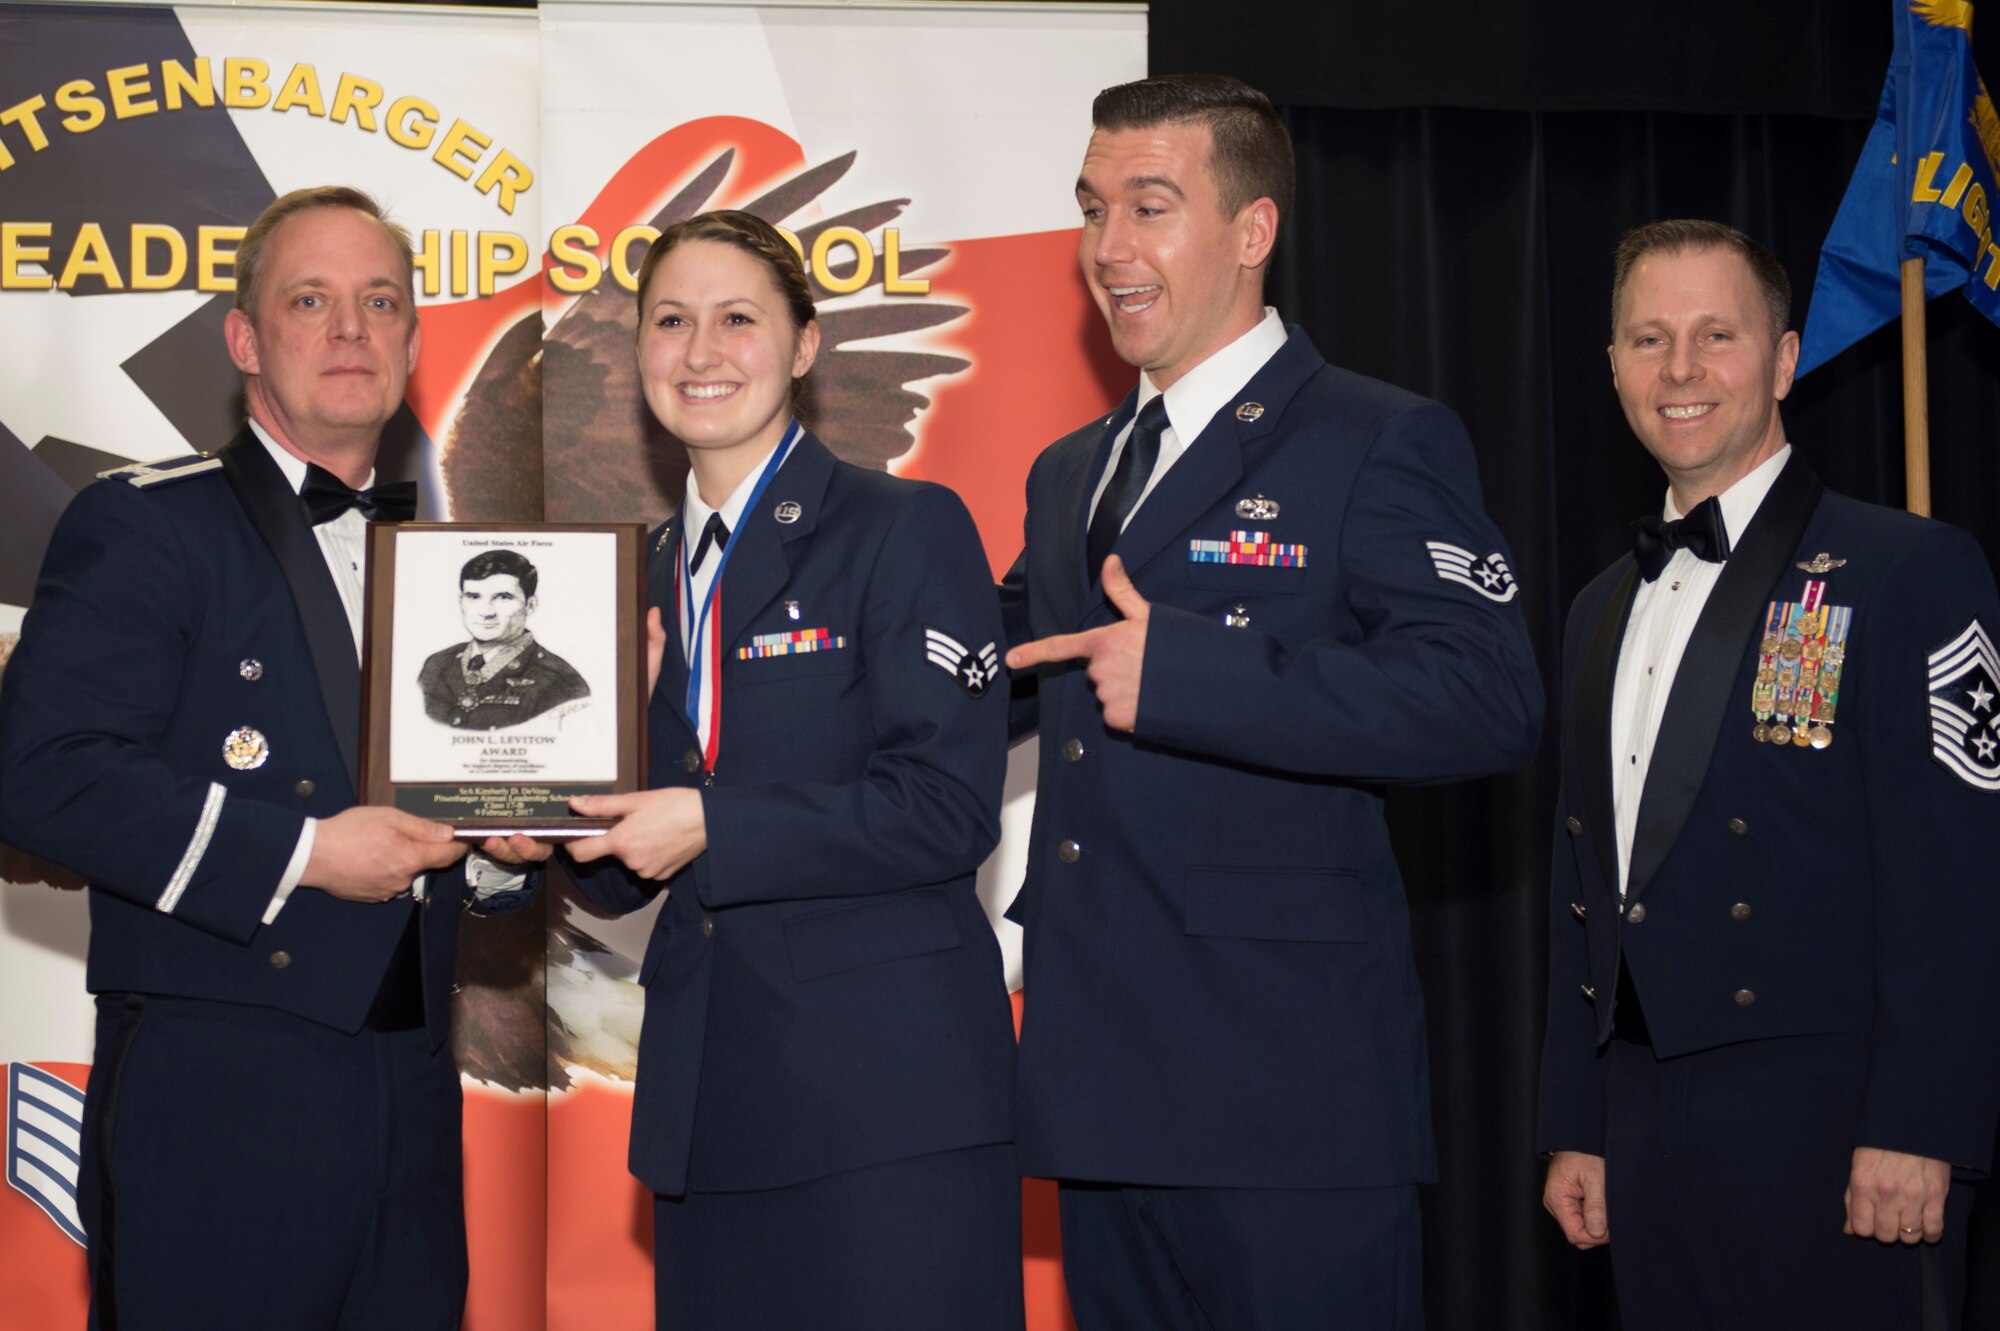 U.S. Air Force Senior Airman Kimberly DeVeau, center, Medical Operations Squadron medical technician, receives the John L. Levitow during the Pitsenbarger Airman Leadership School 17-B graduation at Club Eifel on Spangdahlem Air Base, Germany, Feb. 9, 2017. The Levitow award is the highest honor given to the student who displays excellence in all categories of ALS.